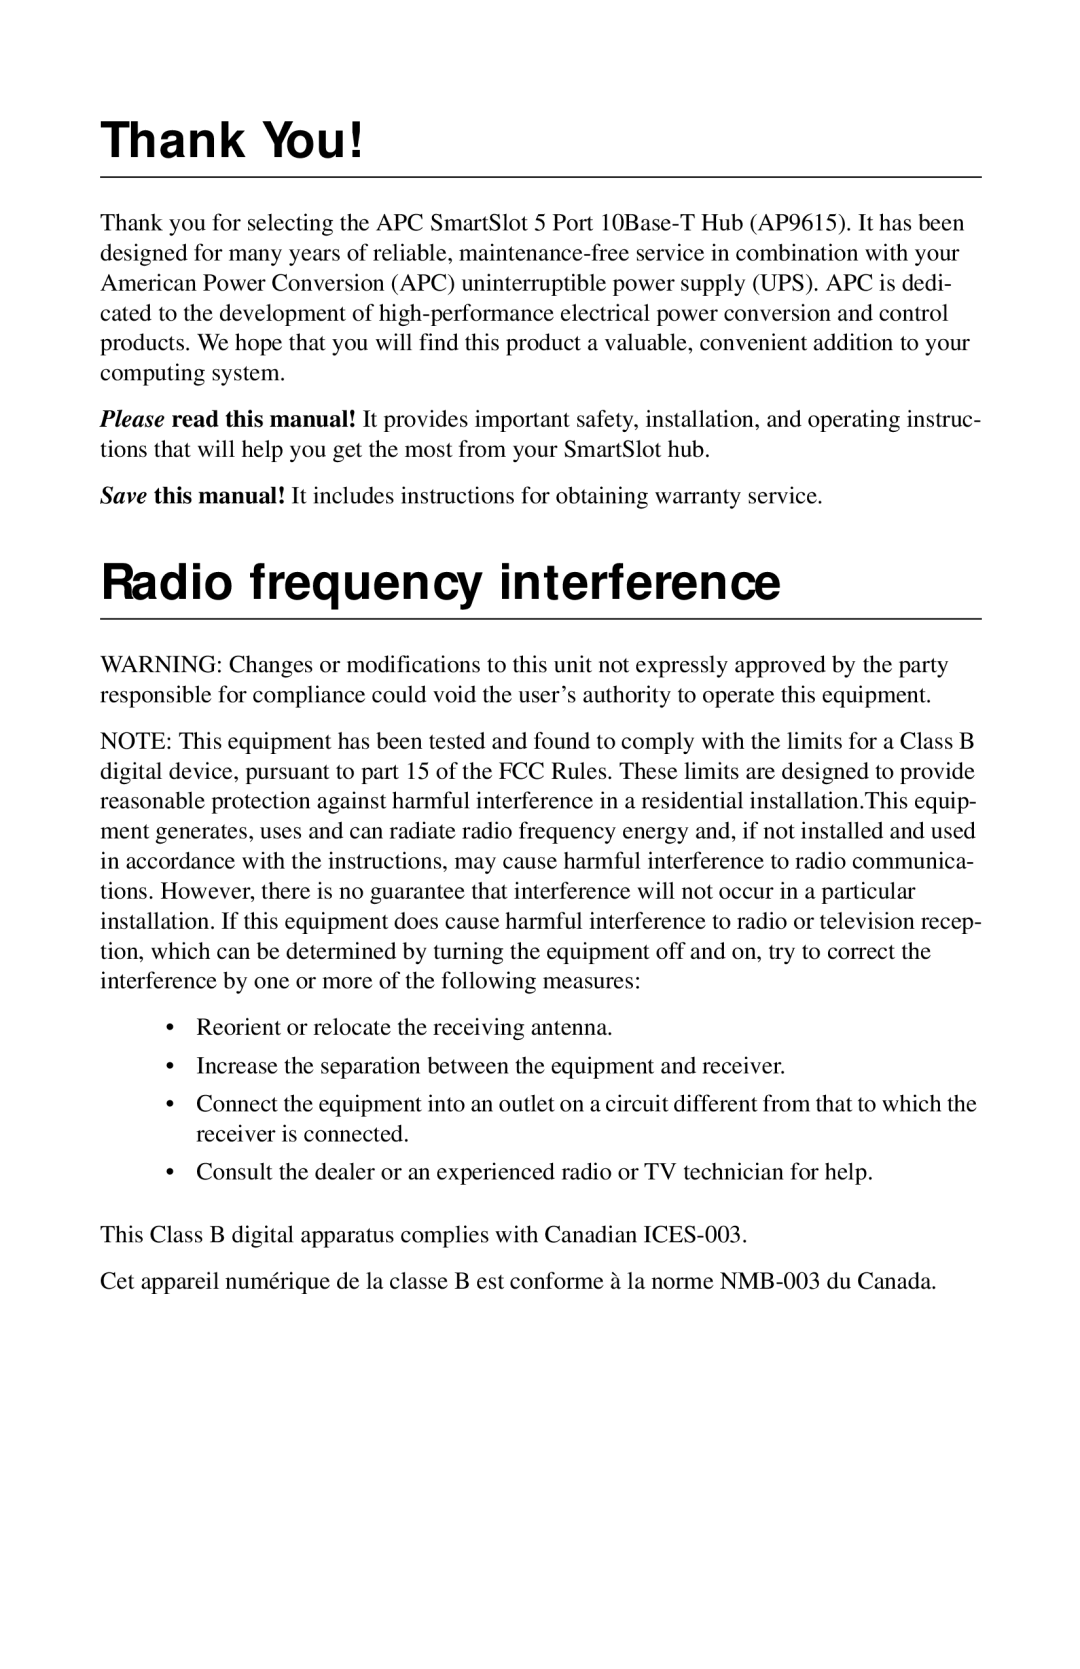 American Power Conversion AP9615 manual Thank You, Radio frequency interference 